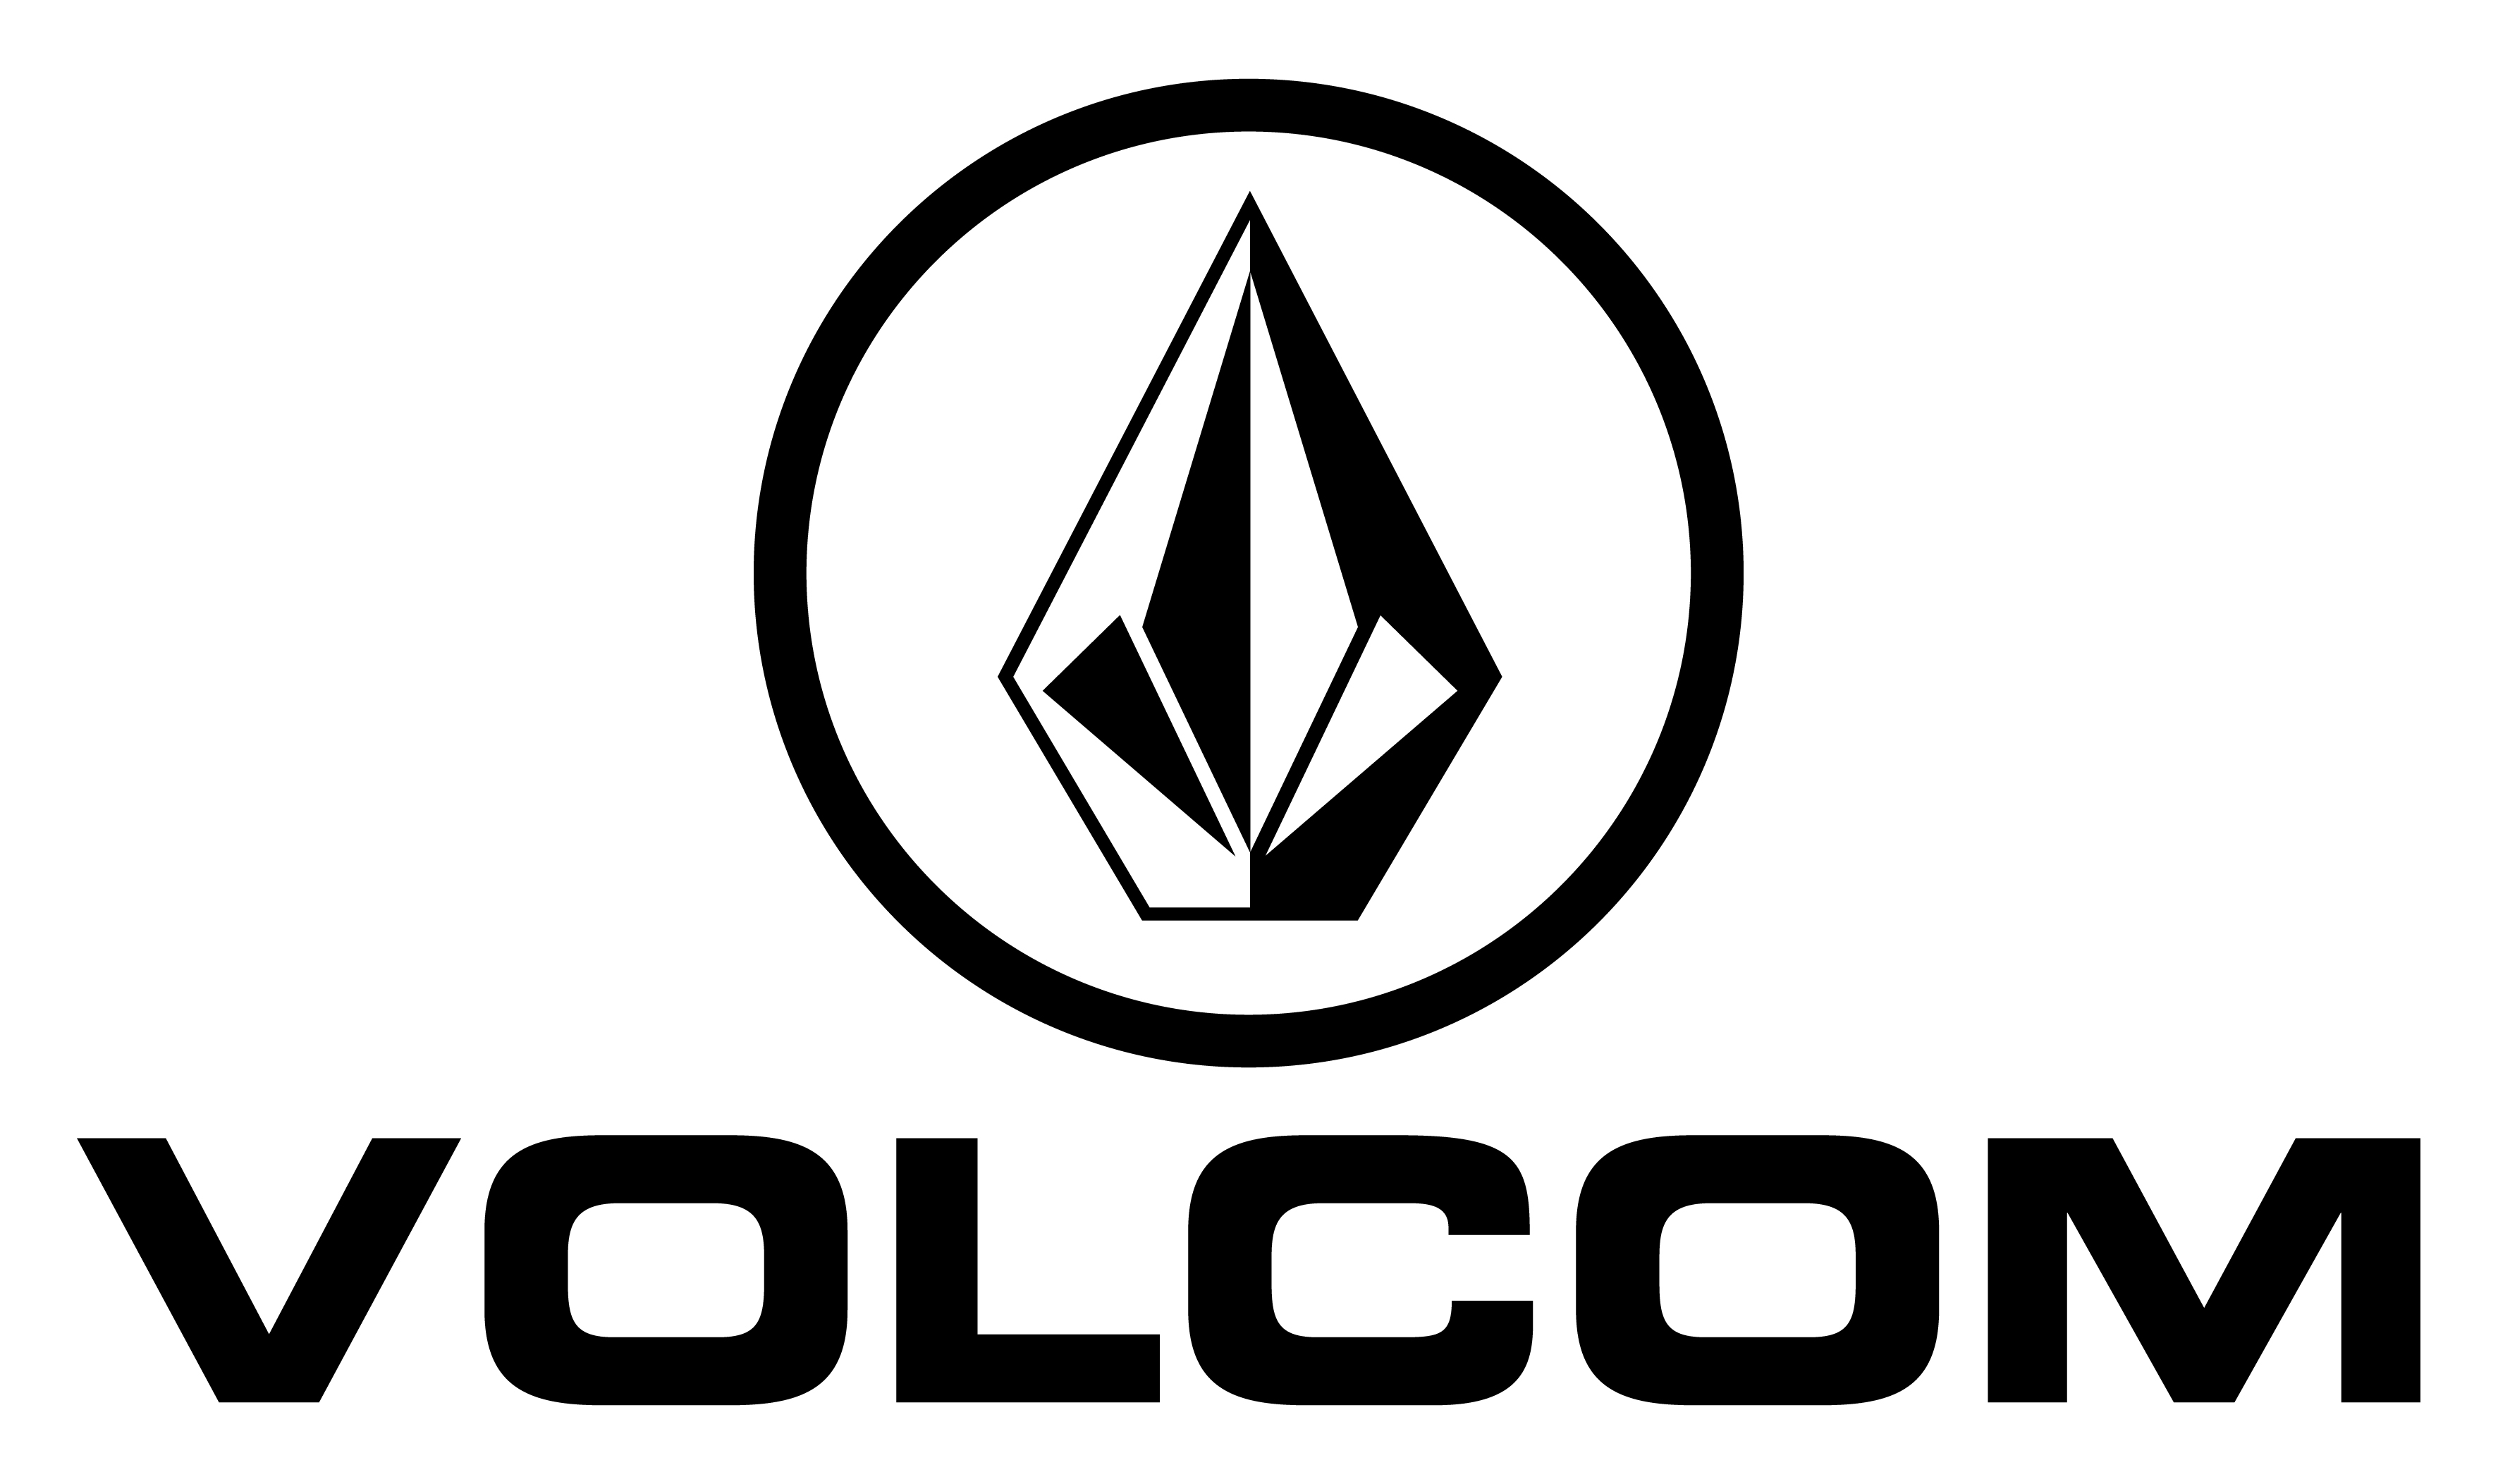 Volcom Logo HD Wallpapers Pictures Backgrounds Images Collection